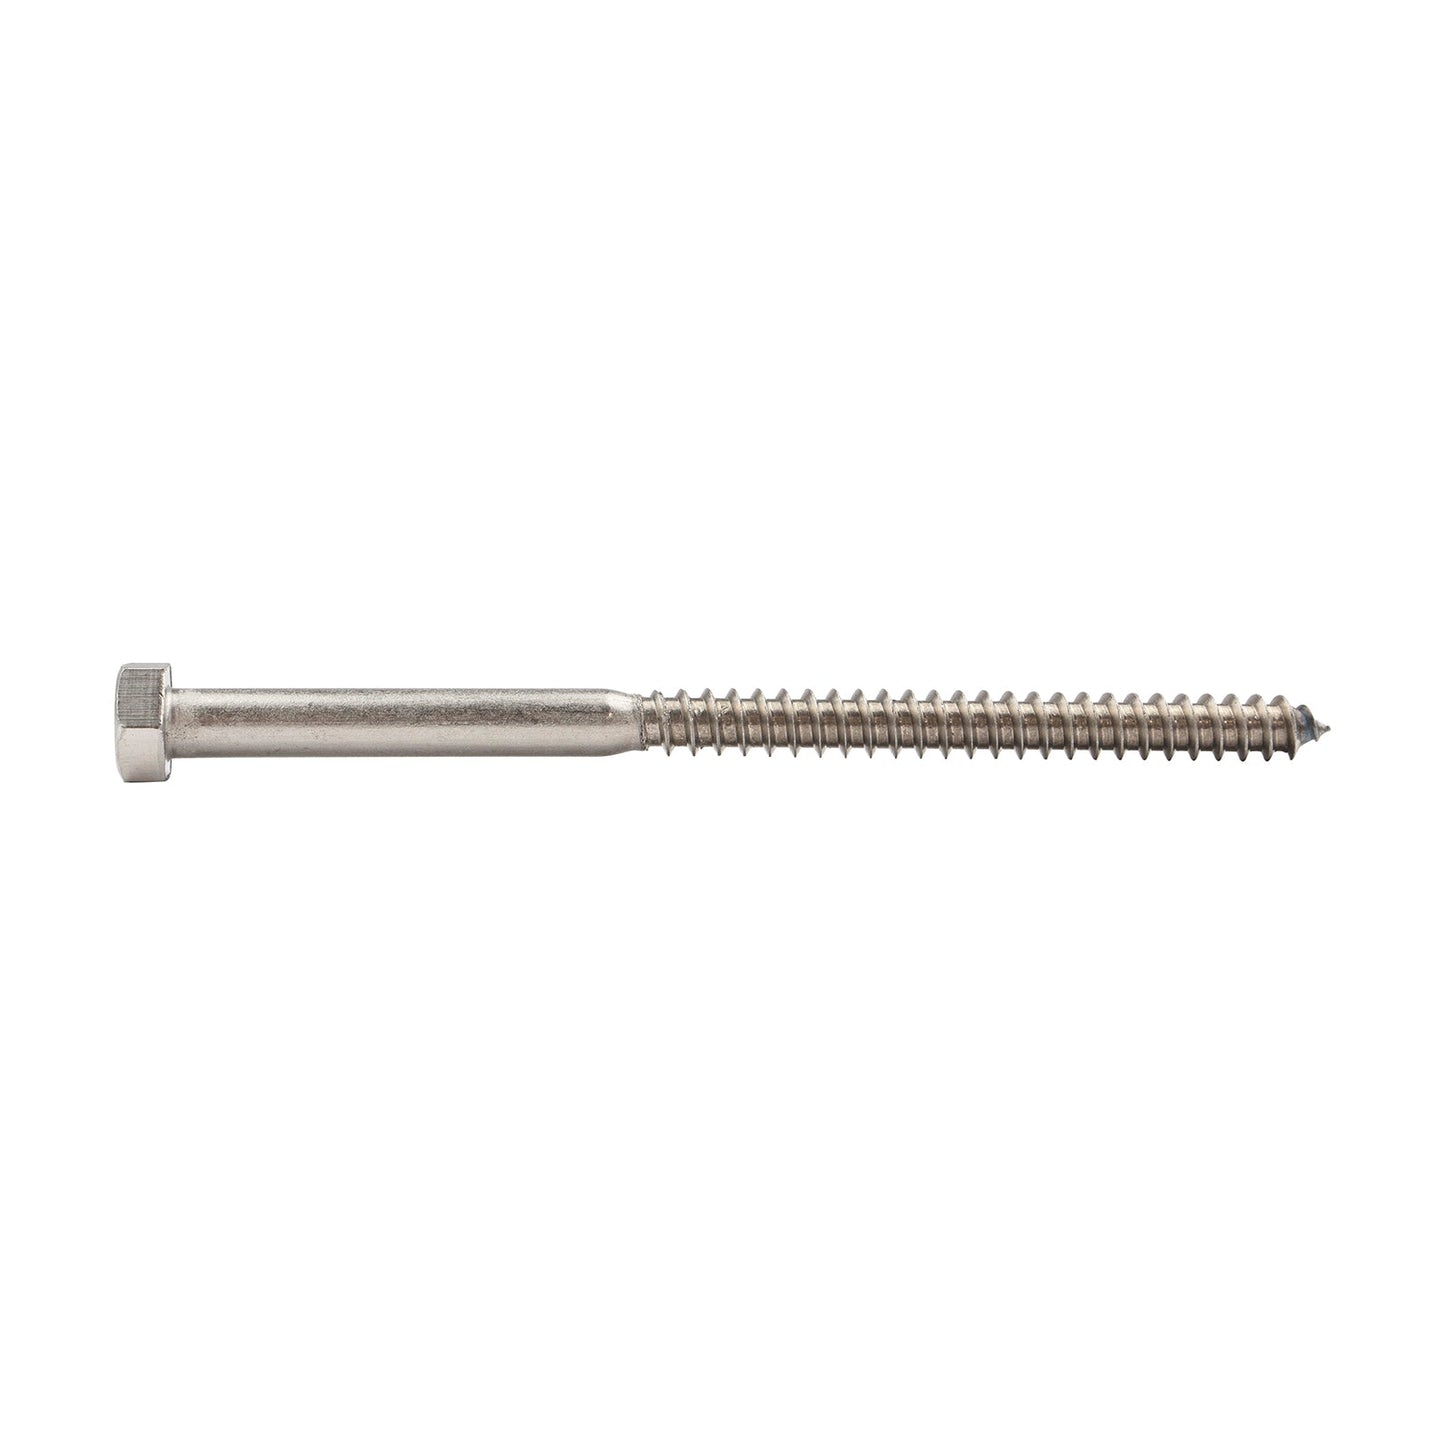 5/16"-9 x 5" Conquest Hex Head Lag Bolt for Wood - 304 Stainless Steel 